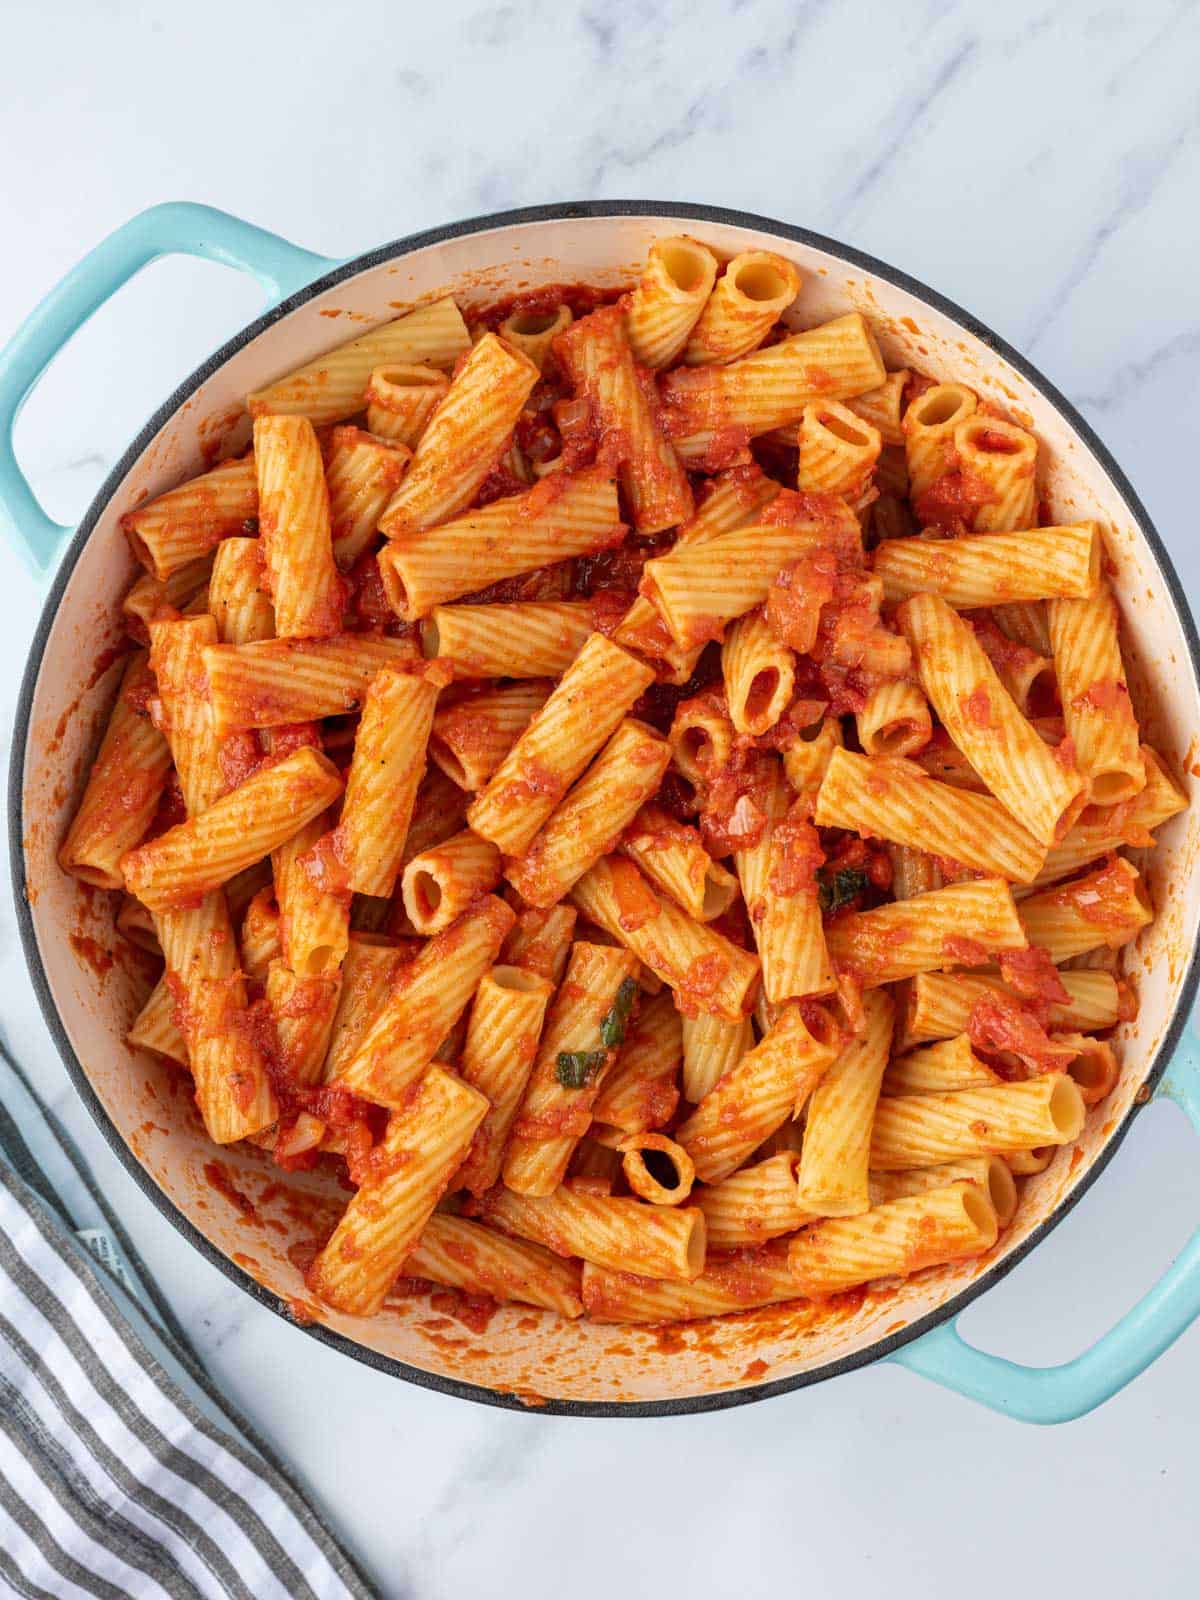 Combining sauce with the rigatoni pasta.